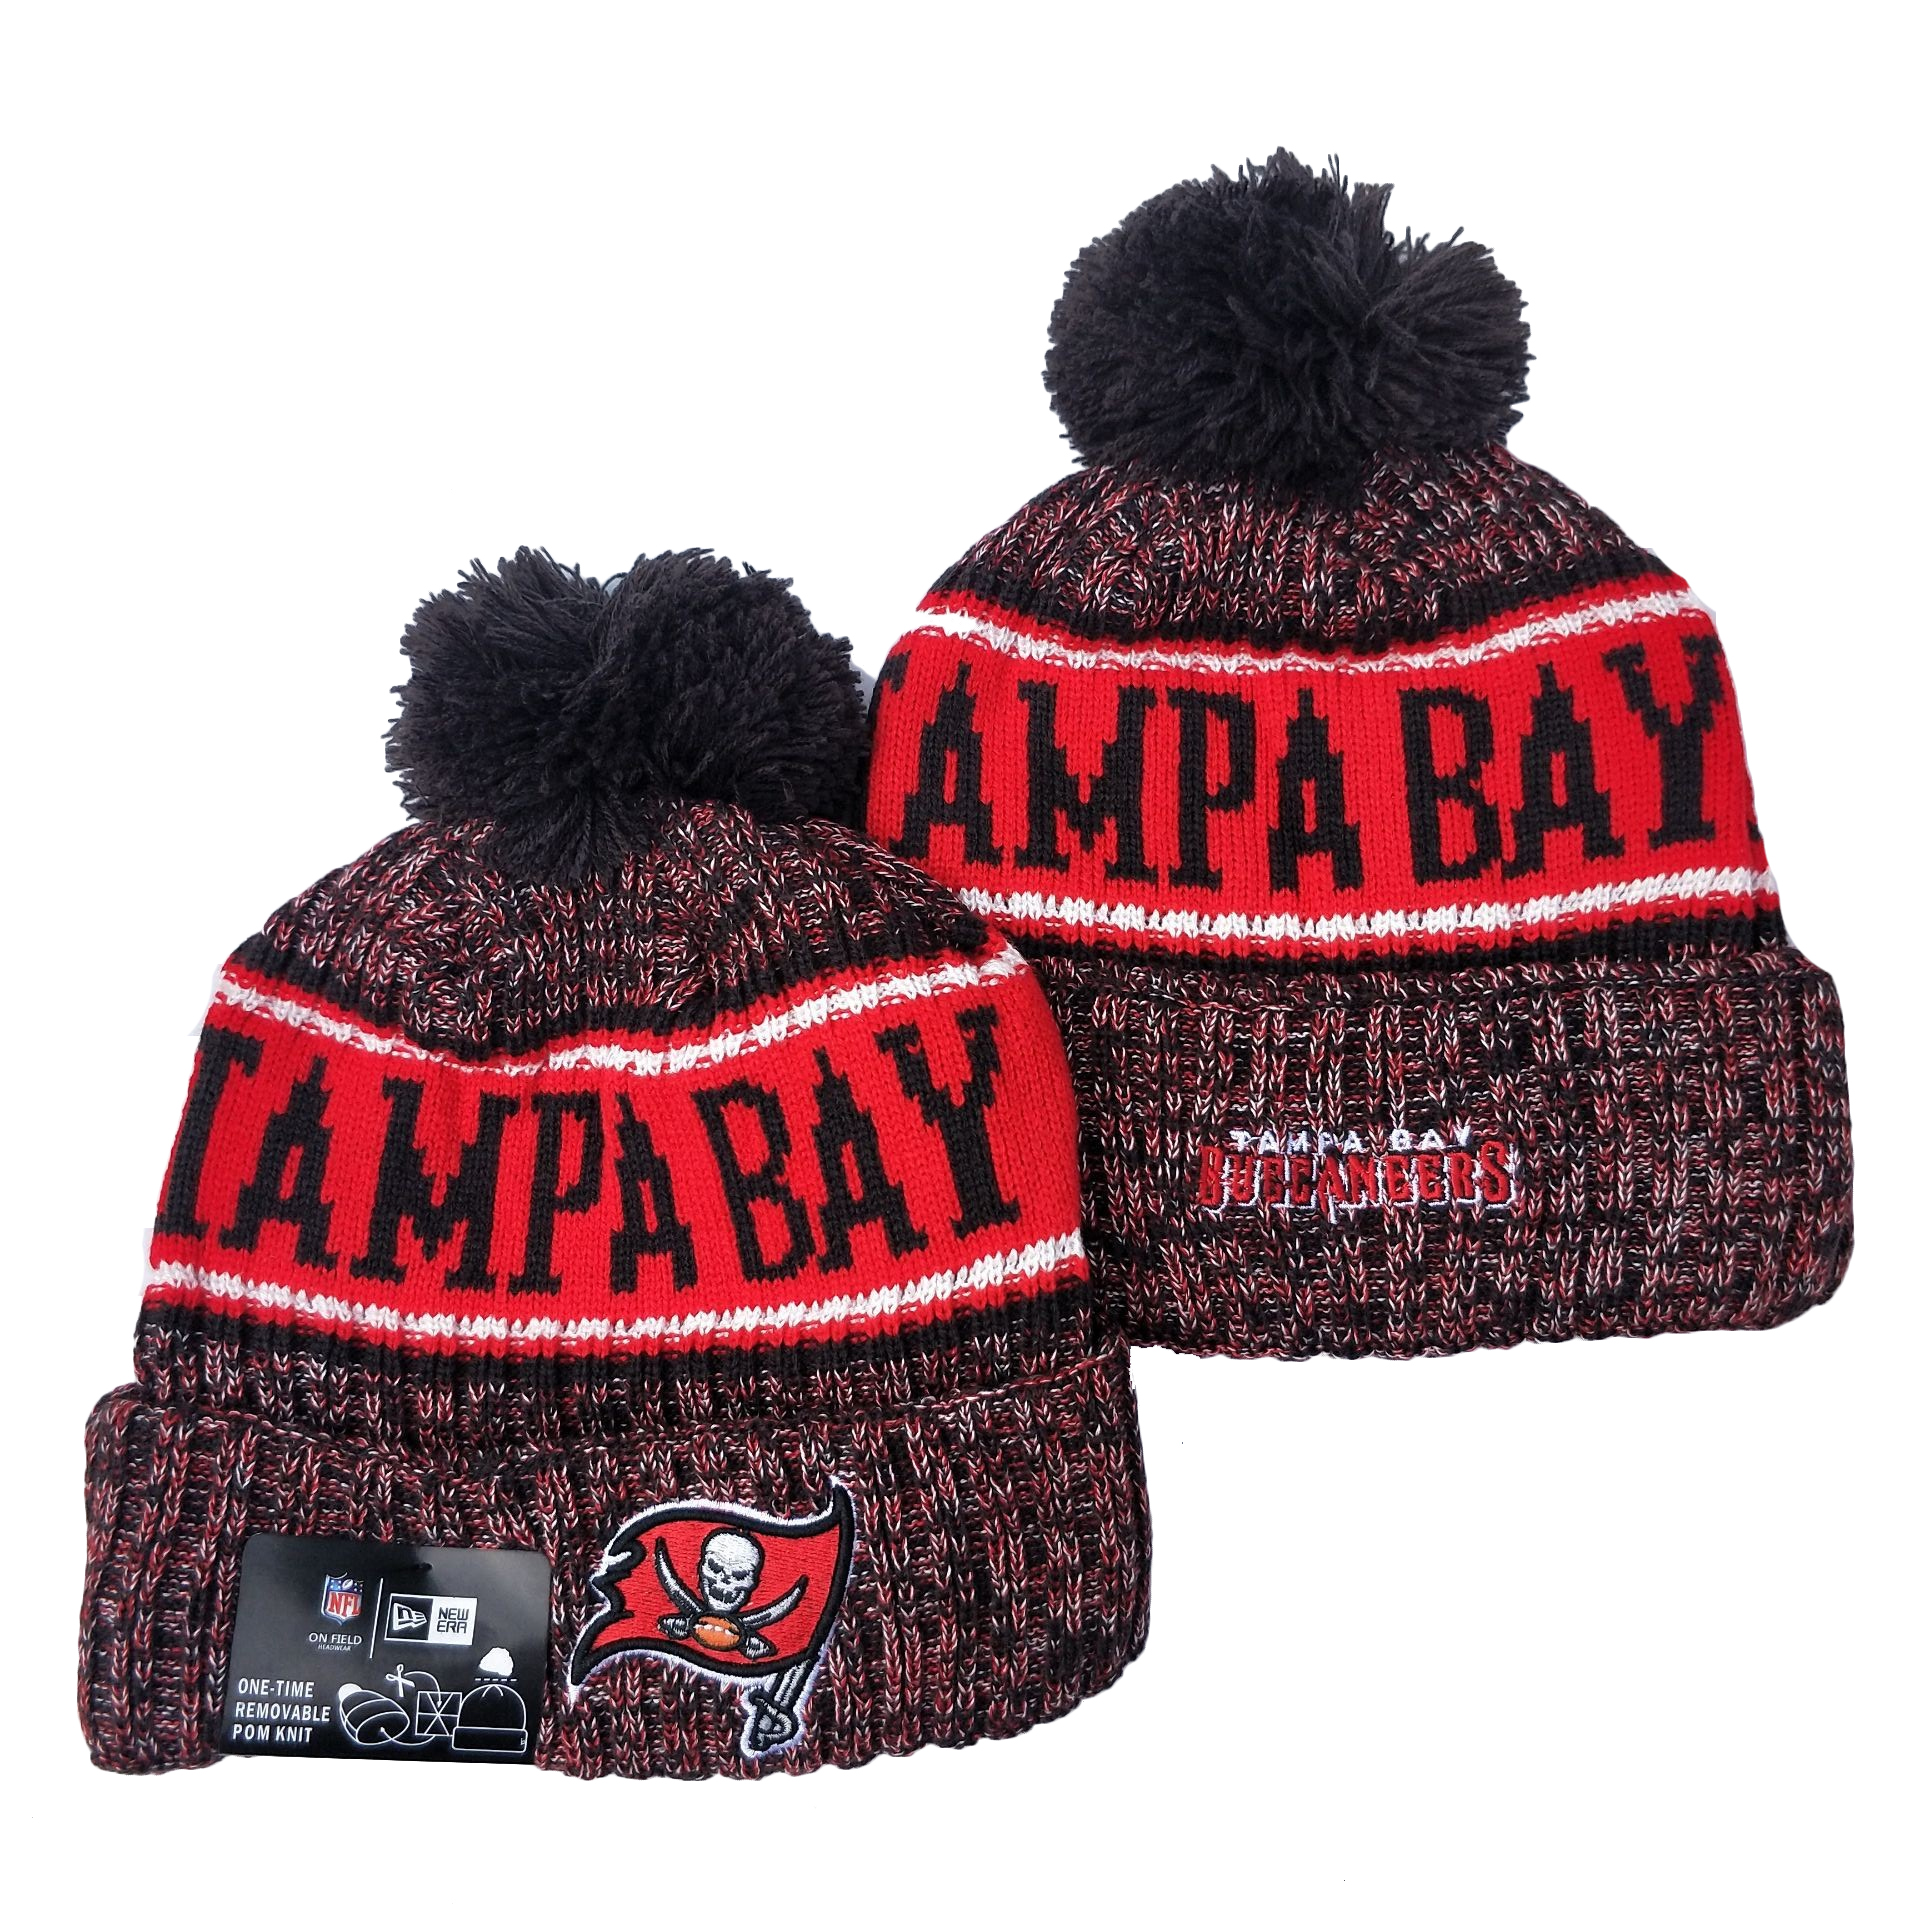 Tampa Bay Buccaneers Knit Hats 034